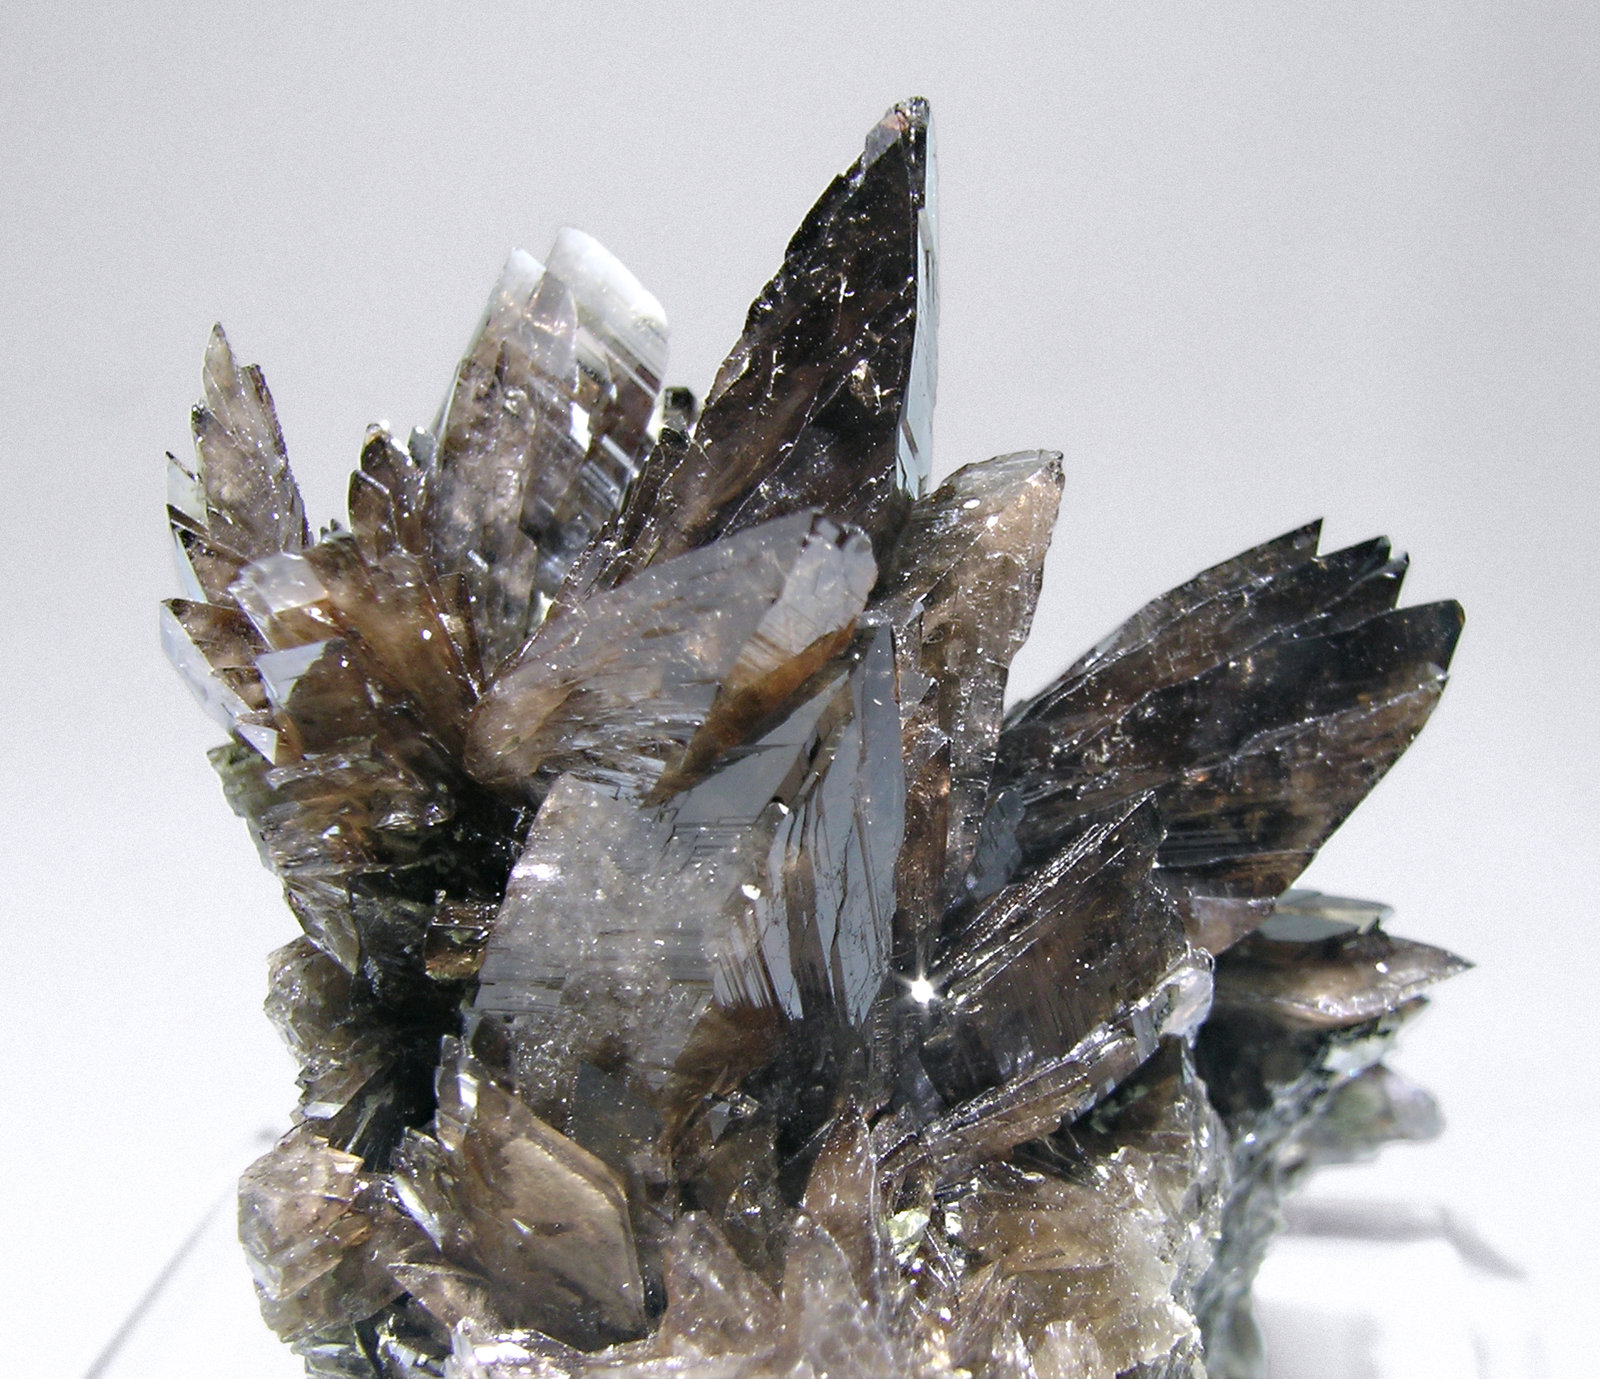 specimens/s_imagesM6/Axinite_Mn-AT96M6d.jpg